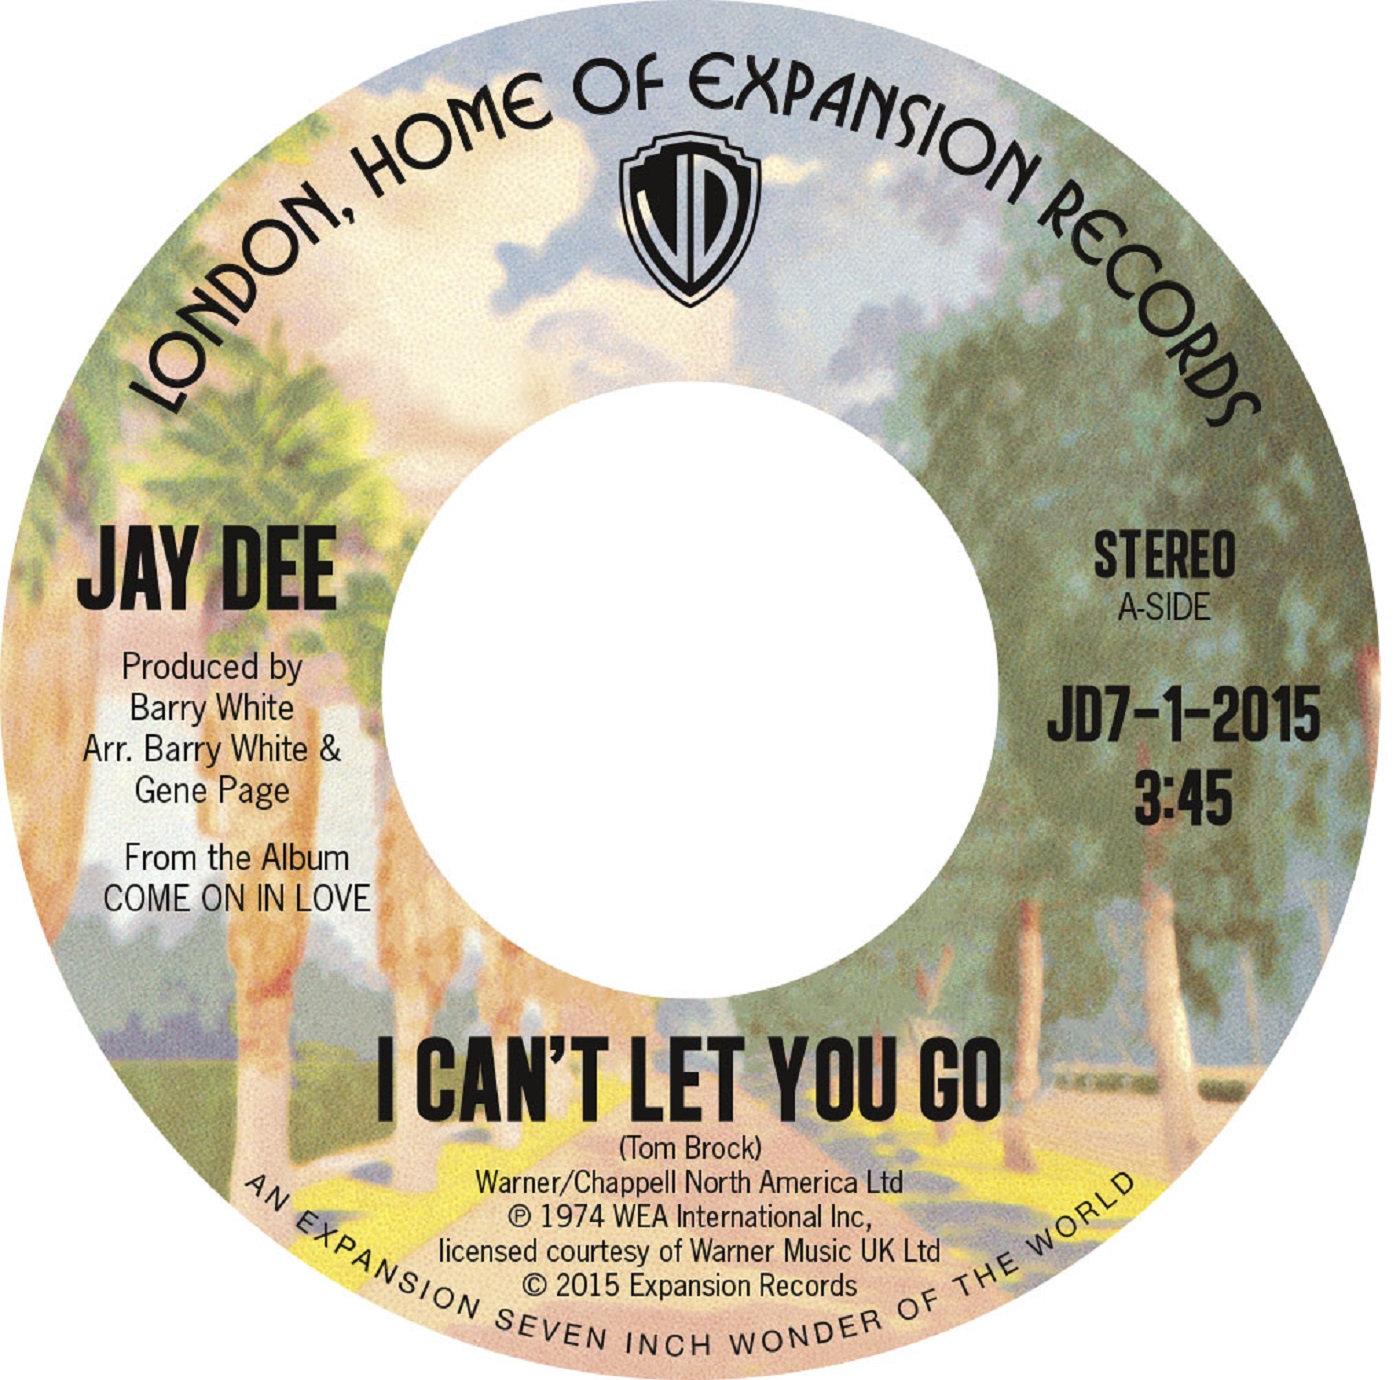 Jay Dee/I CAN'T LET YOU GO (1974) 7"